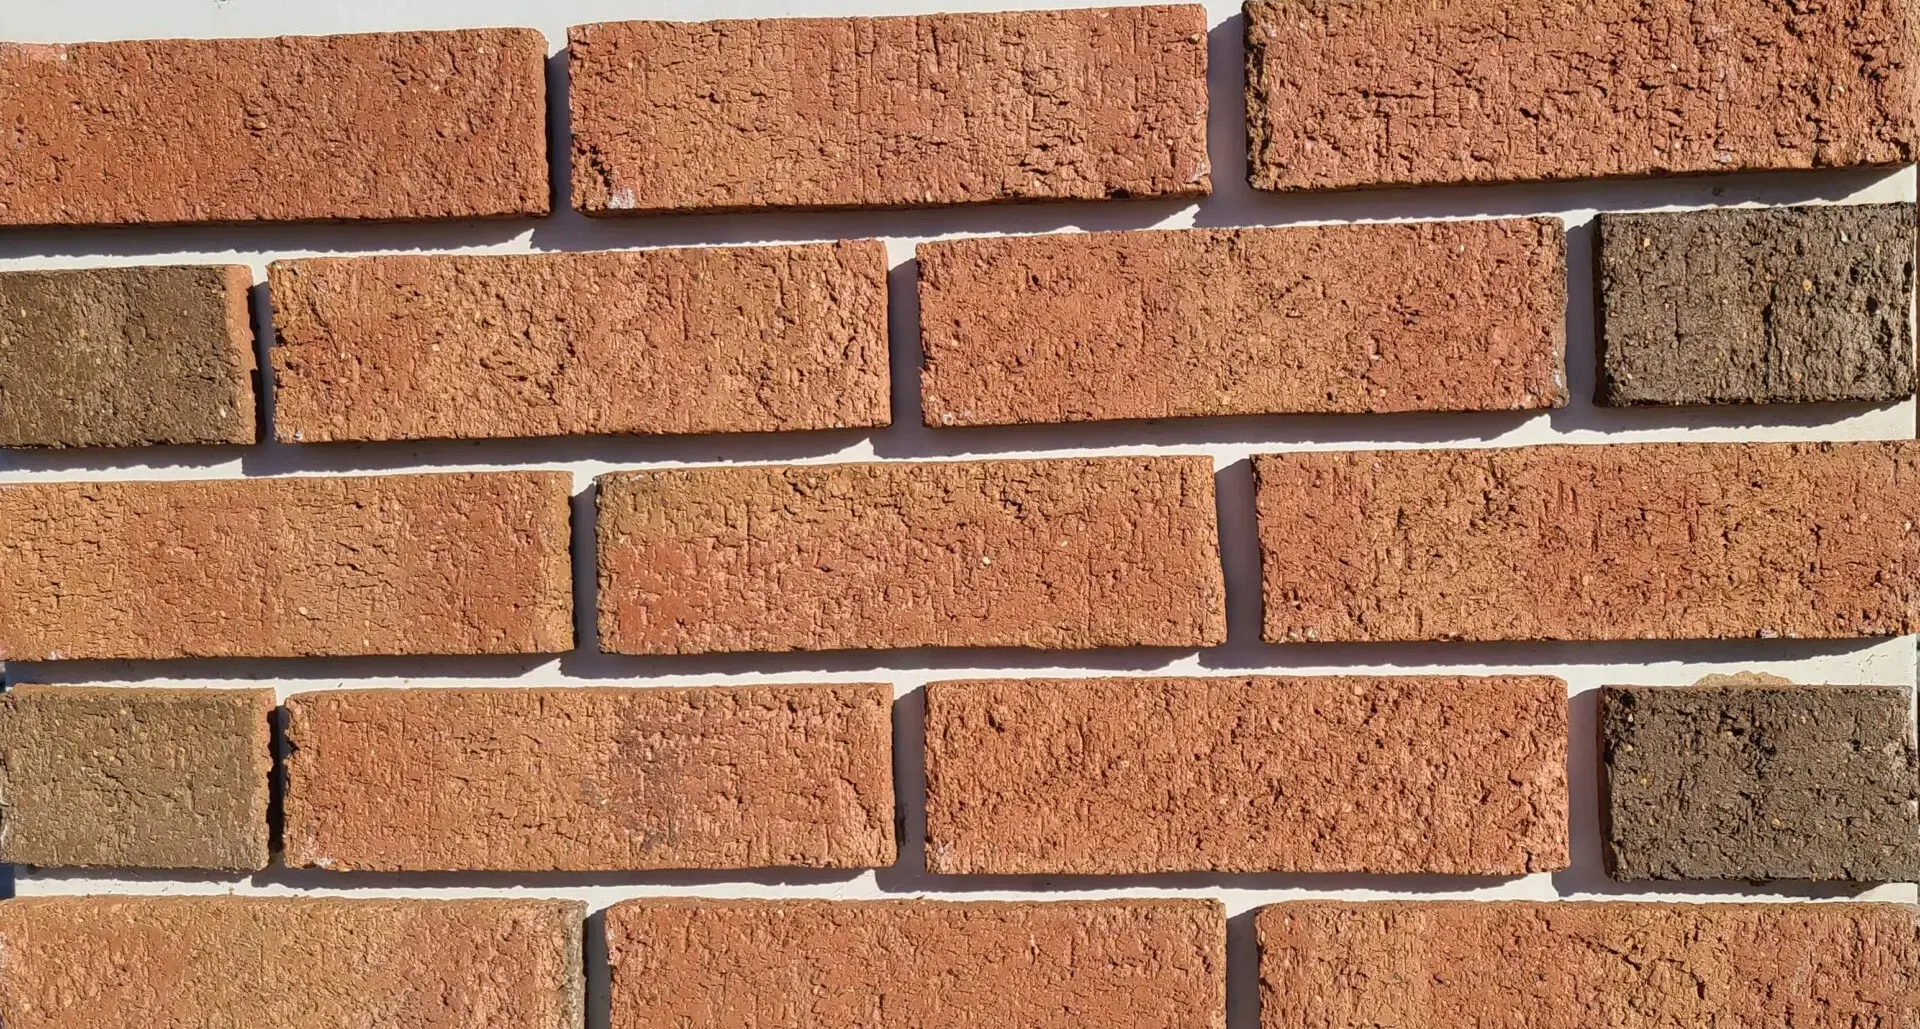 The close up of red rough brick walls